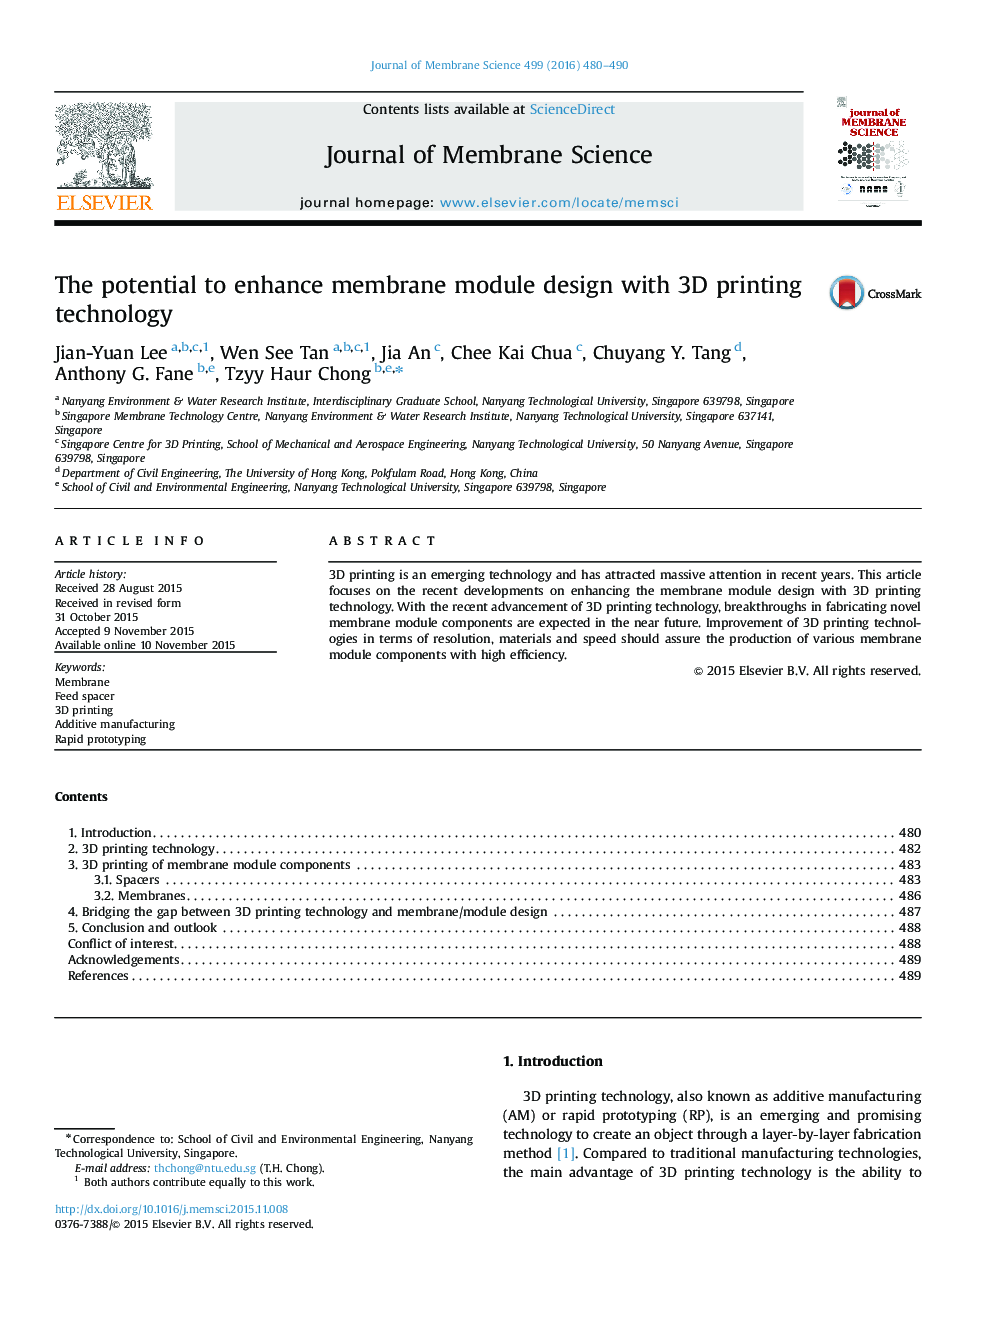 The potential to enhance membrane module design with 3D printing technology